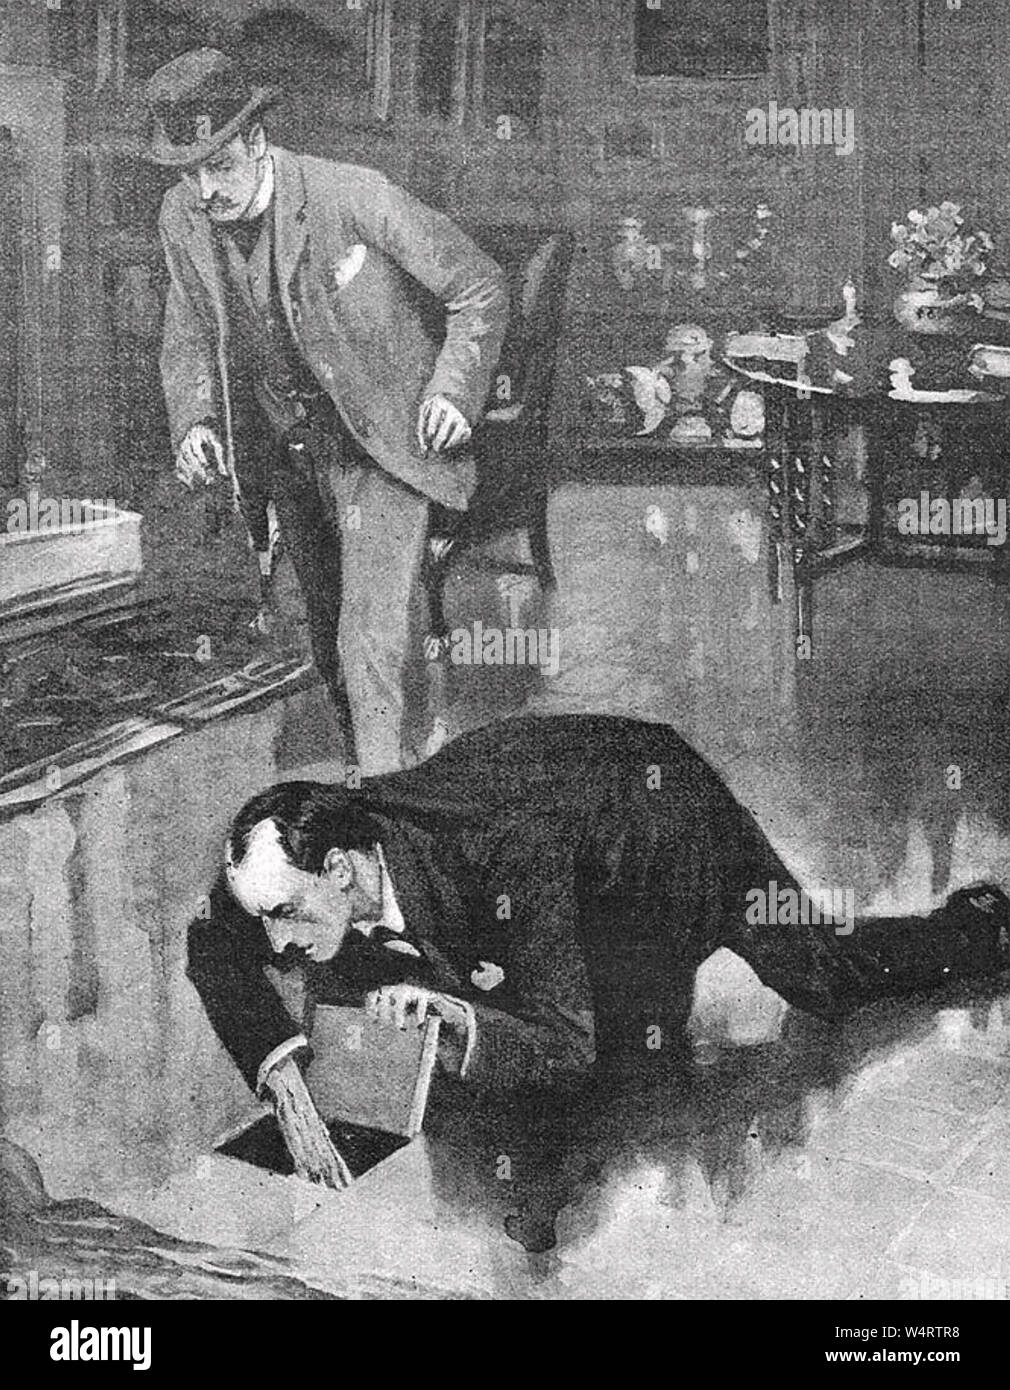 SHERLOCK HOLMES: THE ADVENTURE OF THE SECOND STAIN by Arthur Conan Doyle published in 1904 Stock Photo